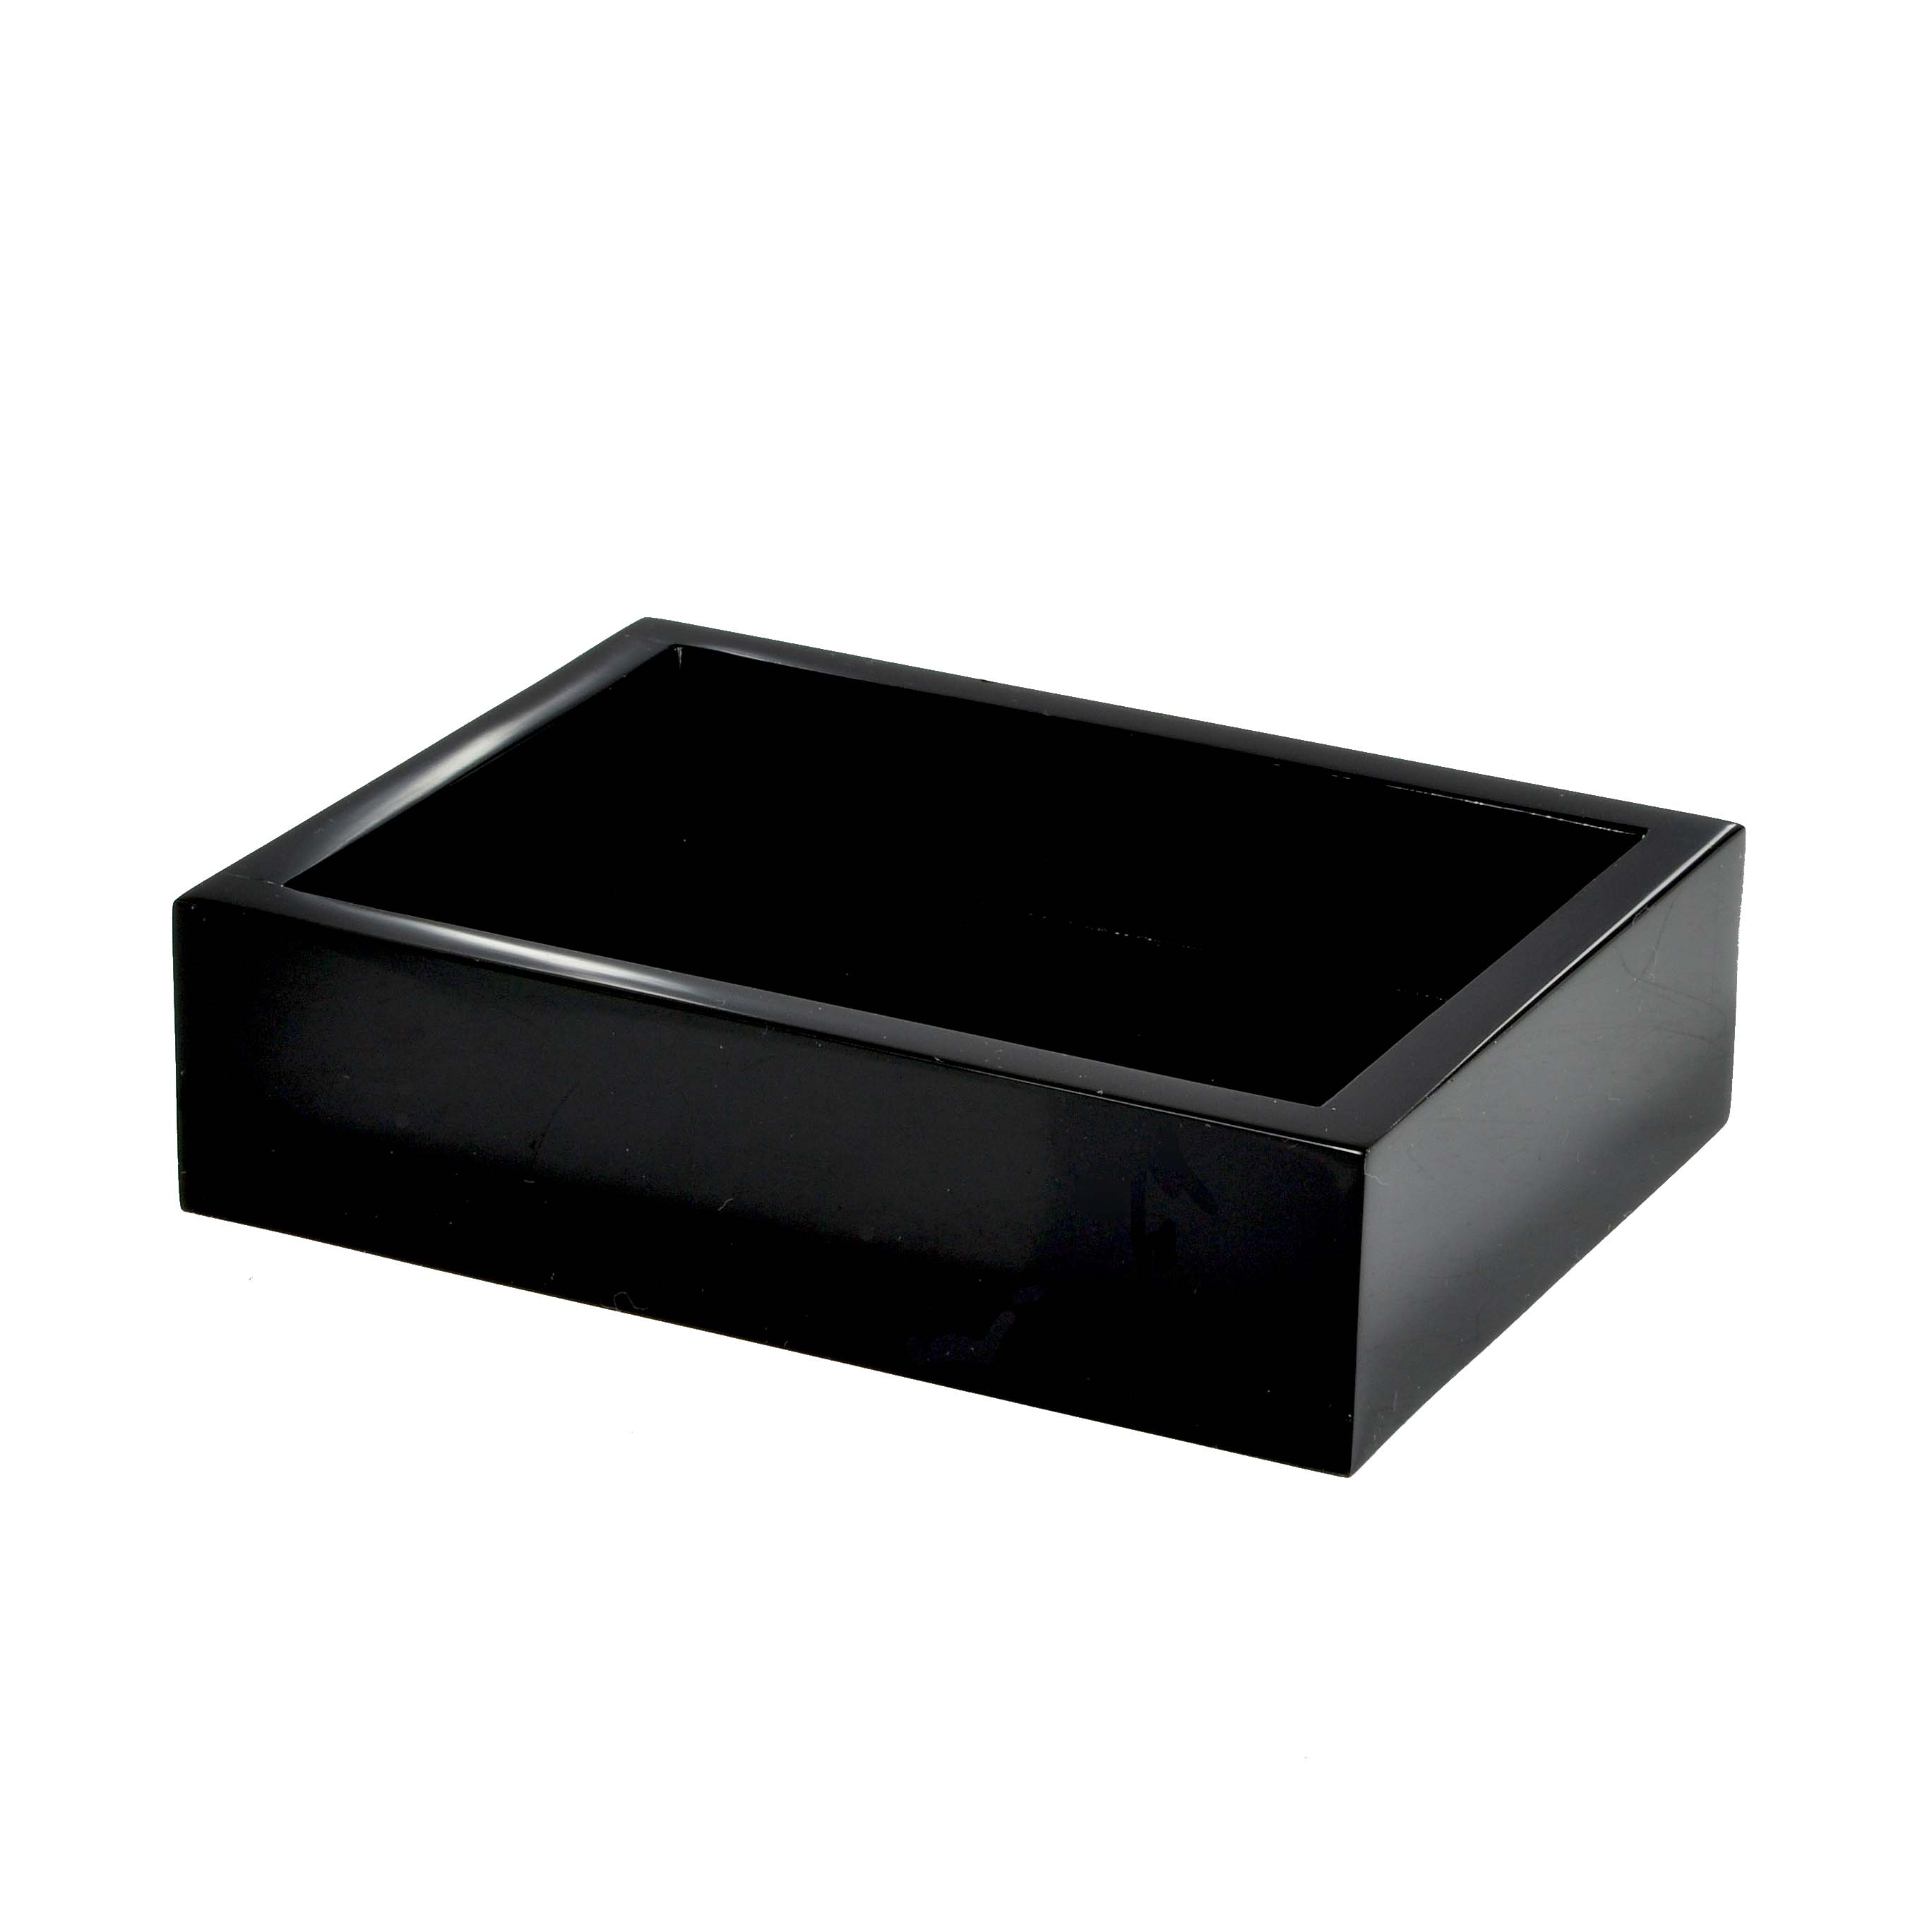 Mike + Ally - Ice Black Soap dish - 31531 - Black - 